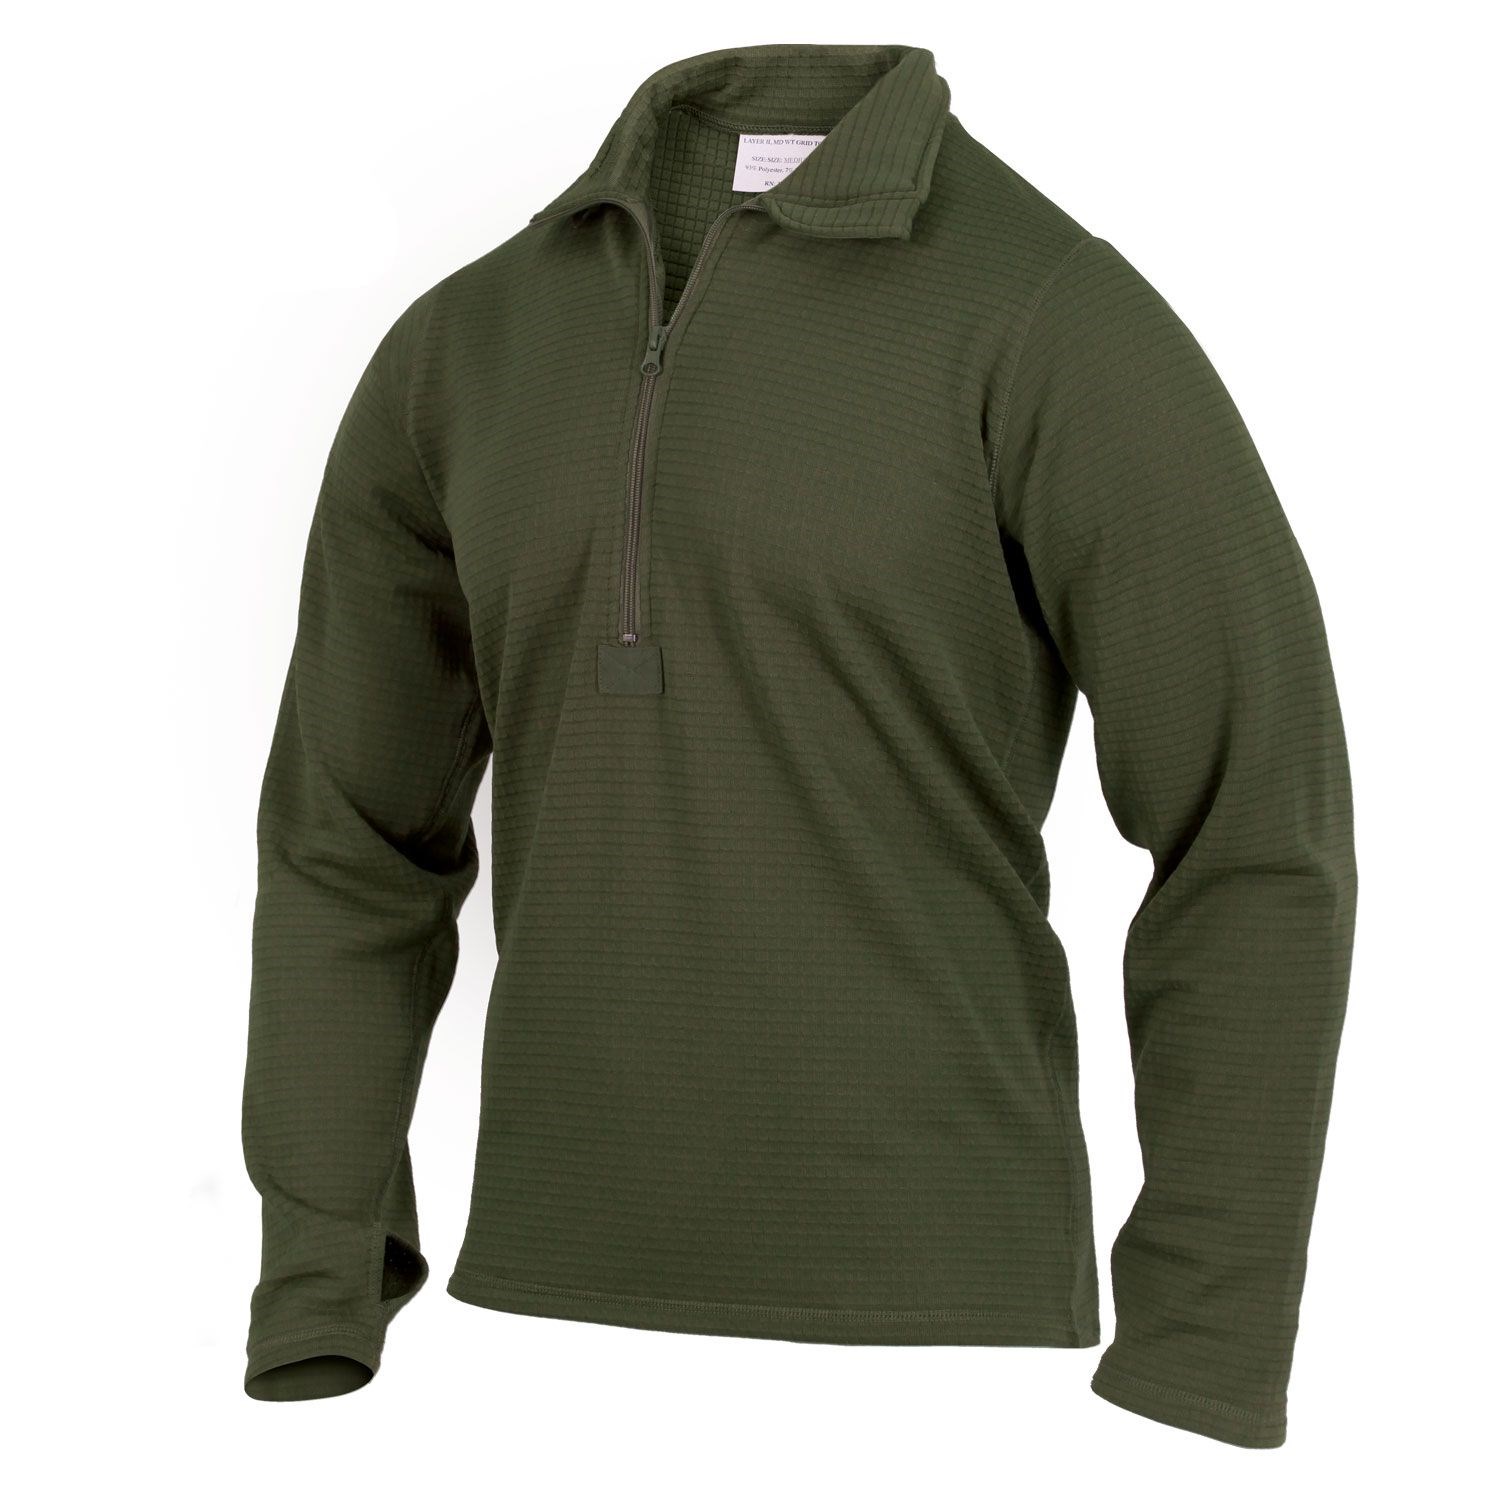 Shirt LEVEL II functional 3Gen. OLIVE DRAB ROTHCO 69060 L-11